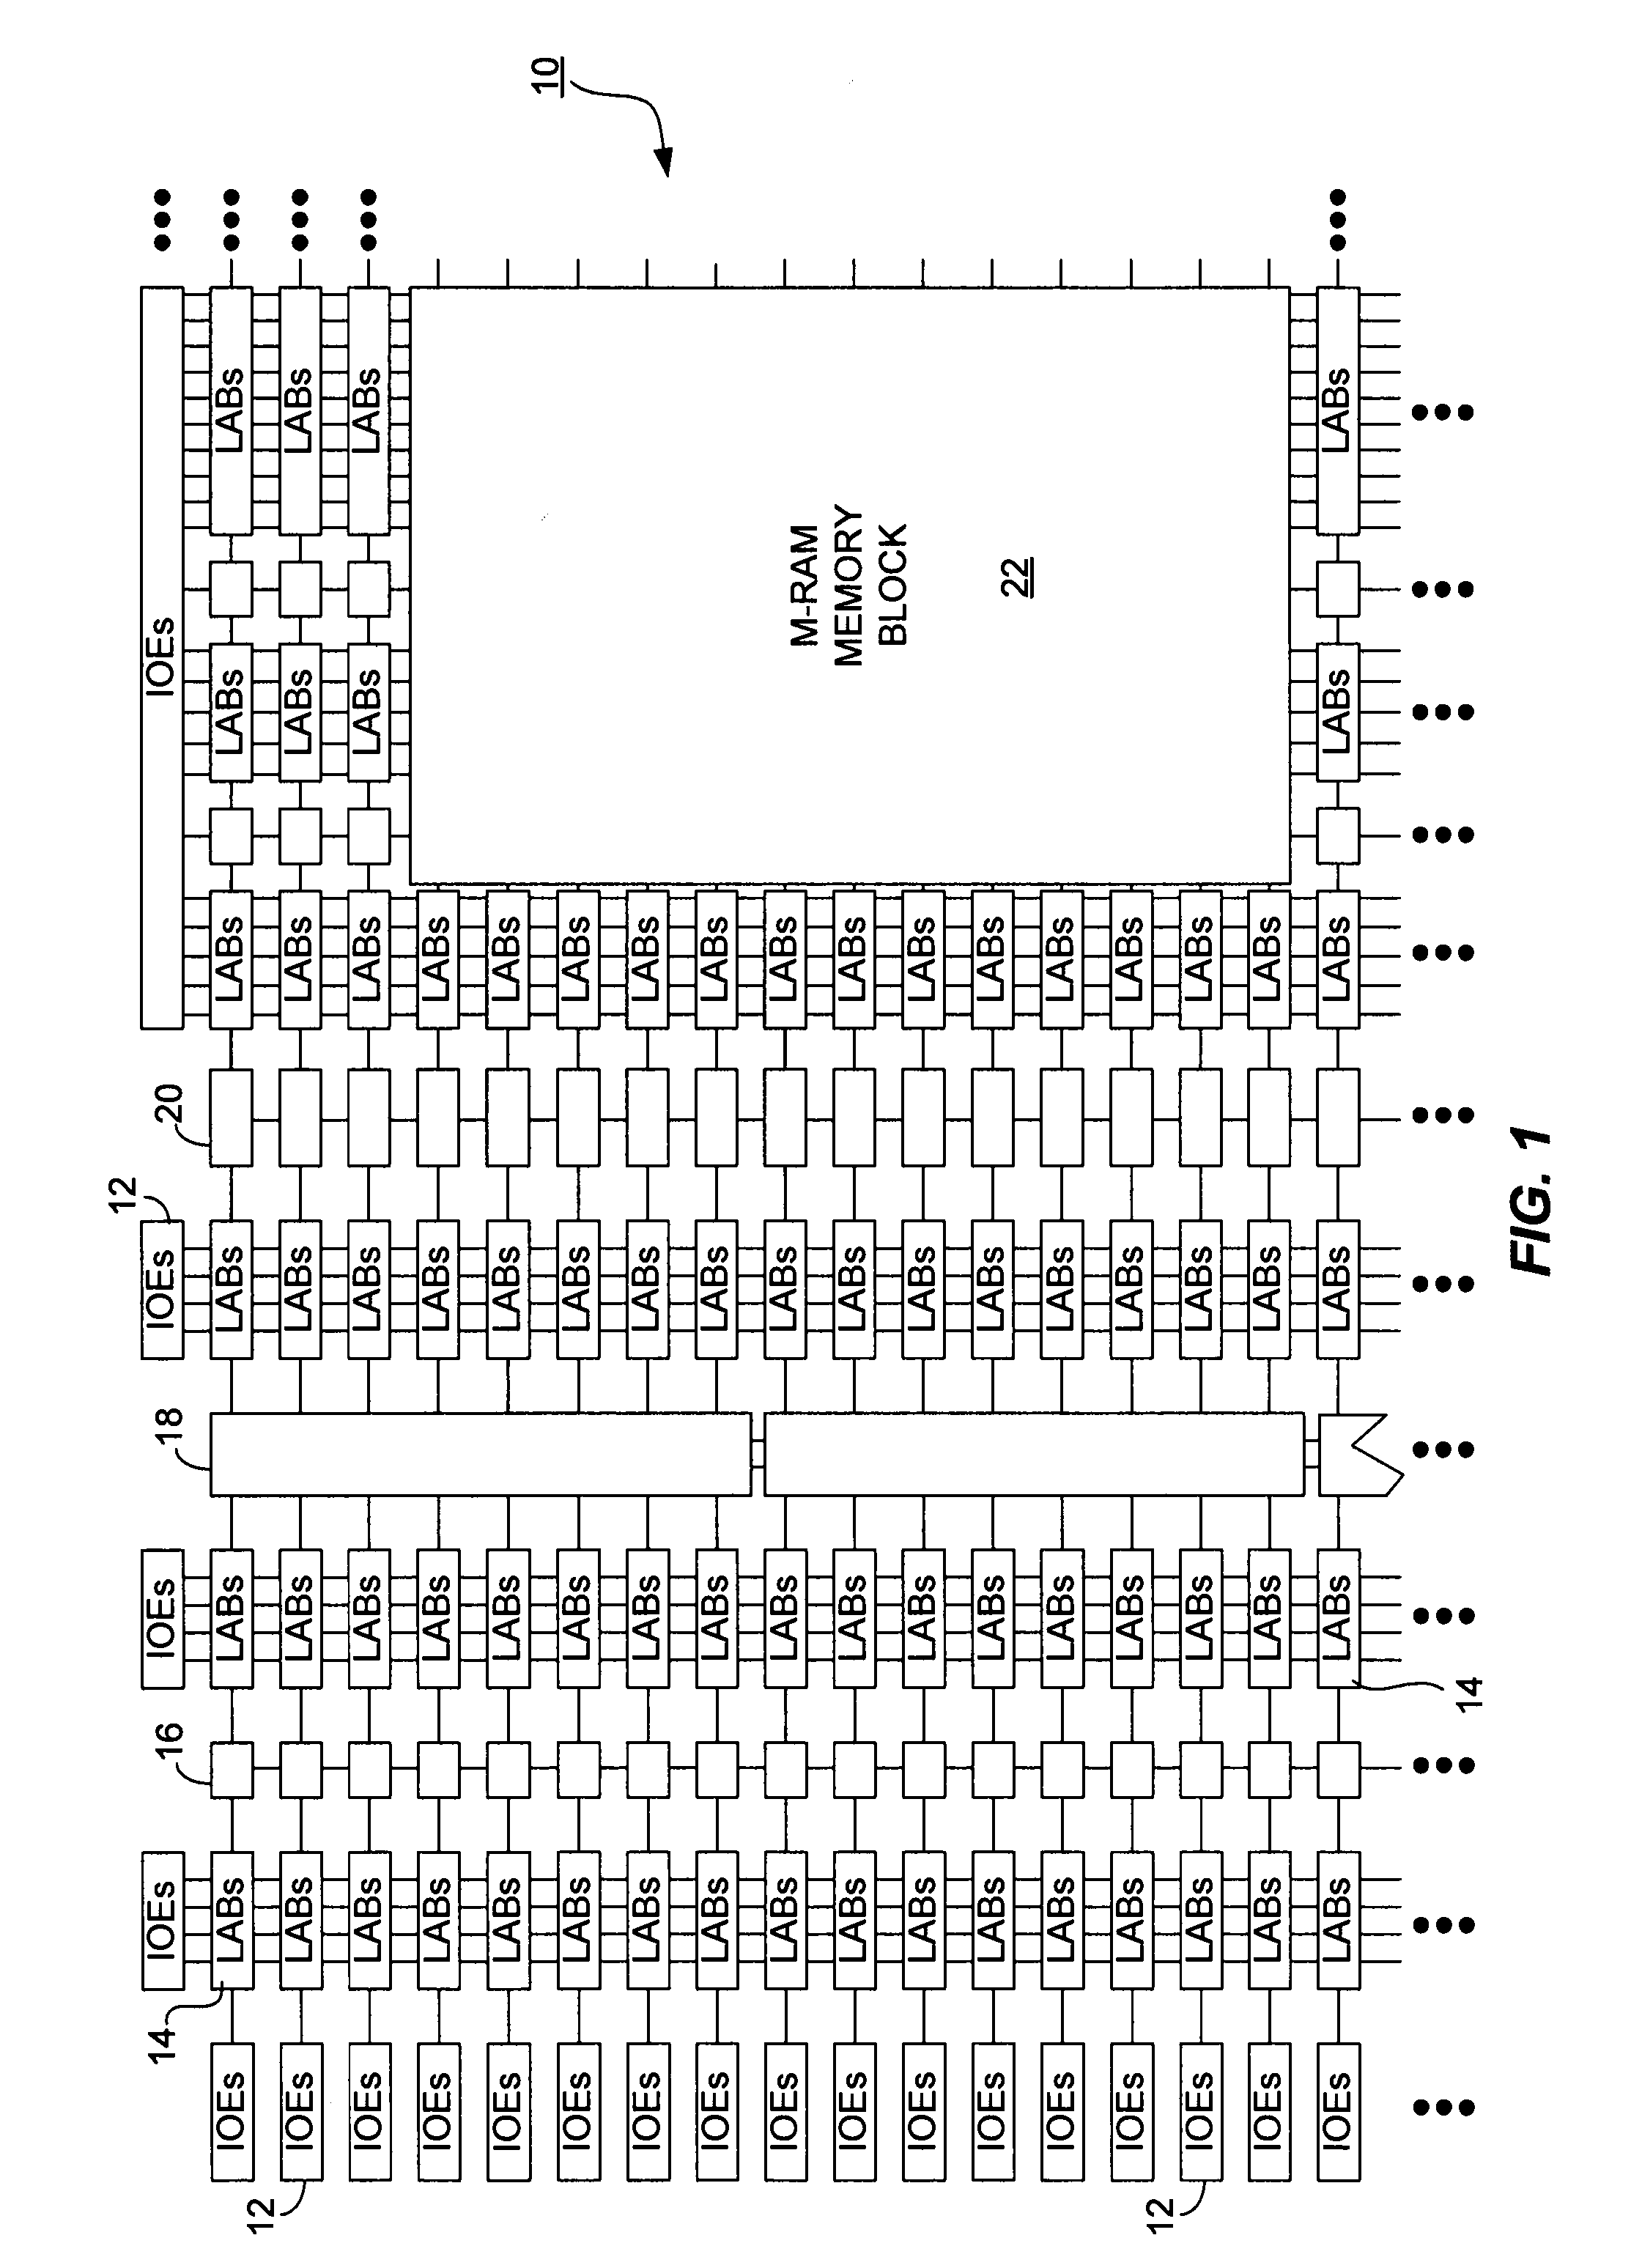 Multi-row block supporting row level redundancy in a pld